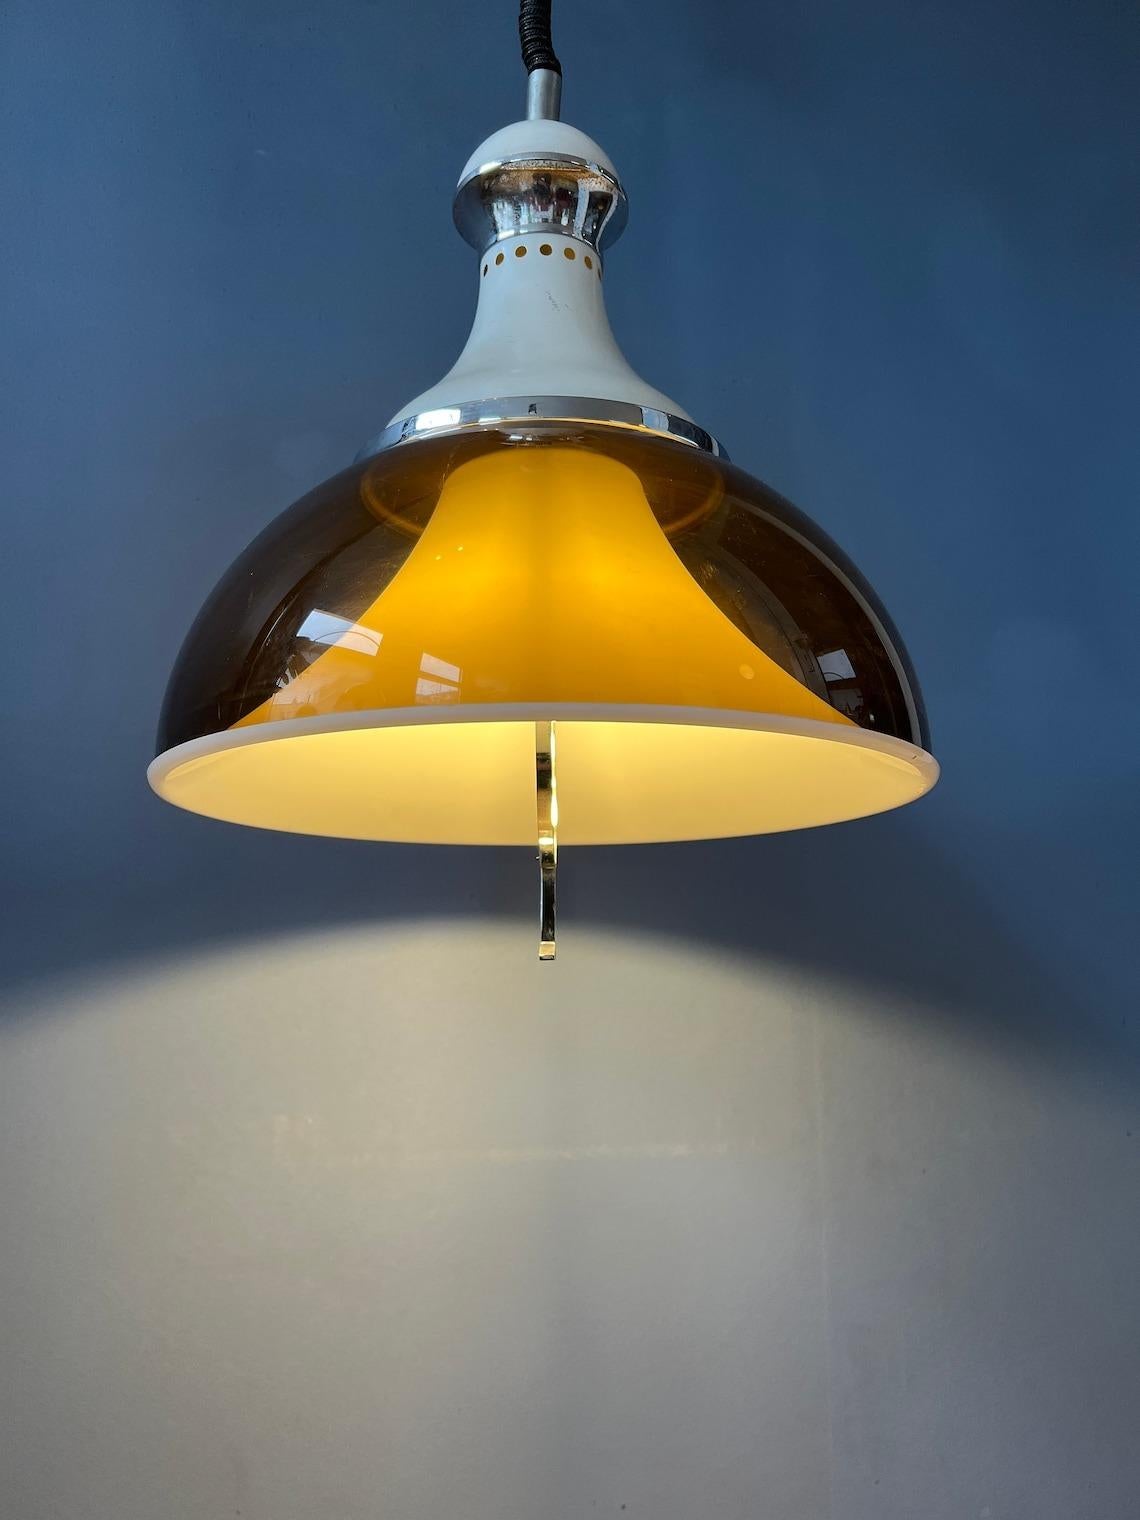 Mid century Stilux Milano space age pendant lamp with double acrylic glass shade. The lamp consists of an acrylic glass copper coloured outer shade and a white inner shade. The height of the lamp can be adjusted with the rise-and-fall system. The